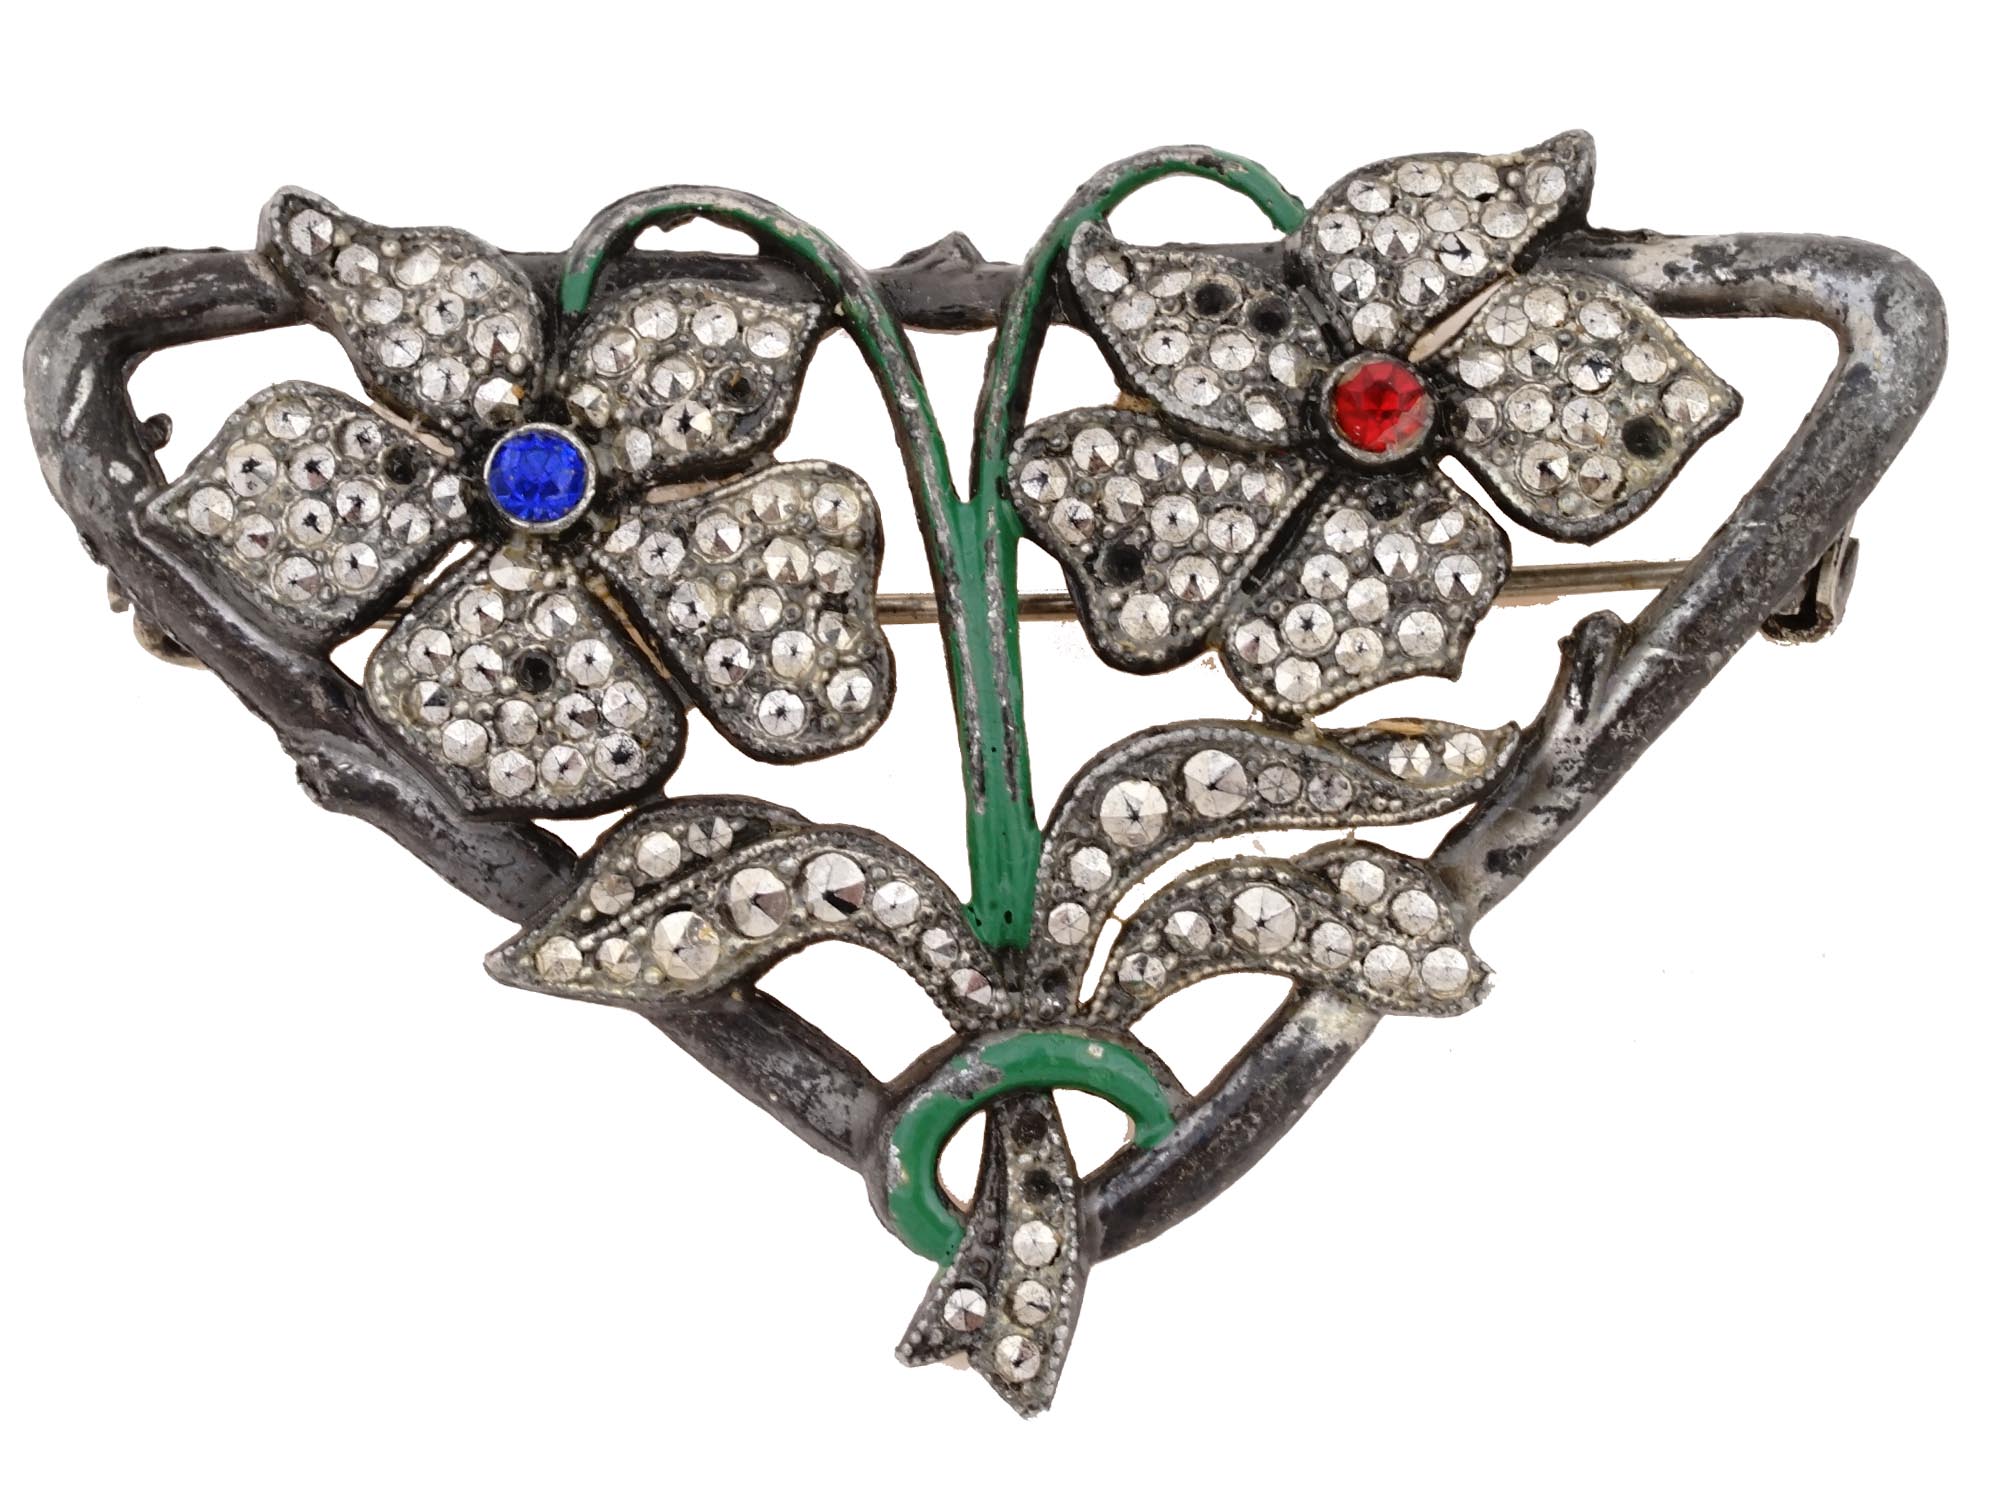 ART DECO AMERICAN STERLING SILVER JEWELRY BROOCH PIC-1